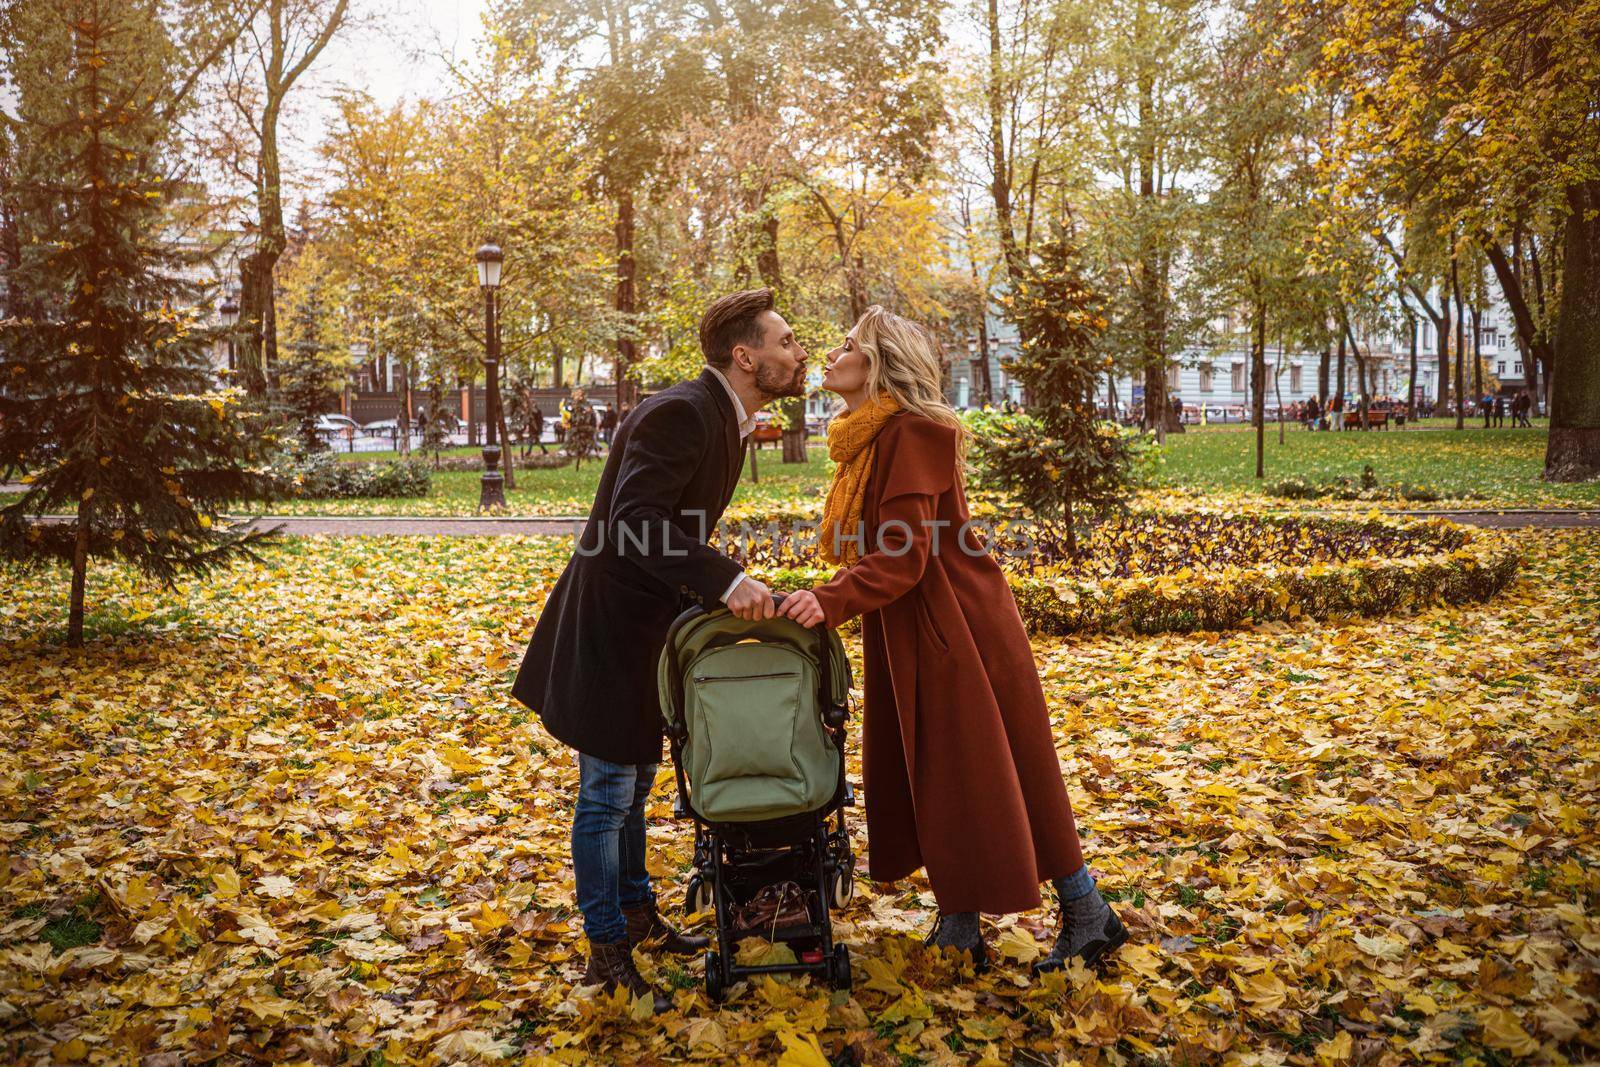 Family walking in an autumn park with a newborn baby in a stroller. Family outdoors in a golden autumn park. Tinted image by LipikStockMedia